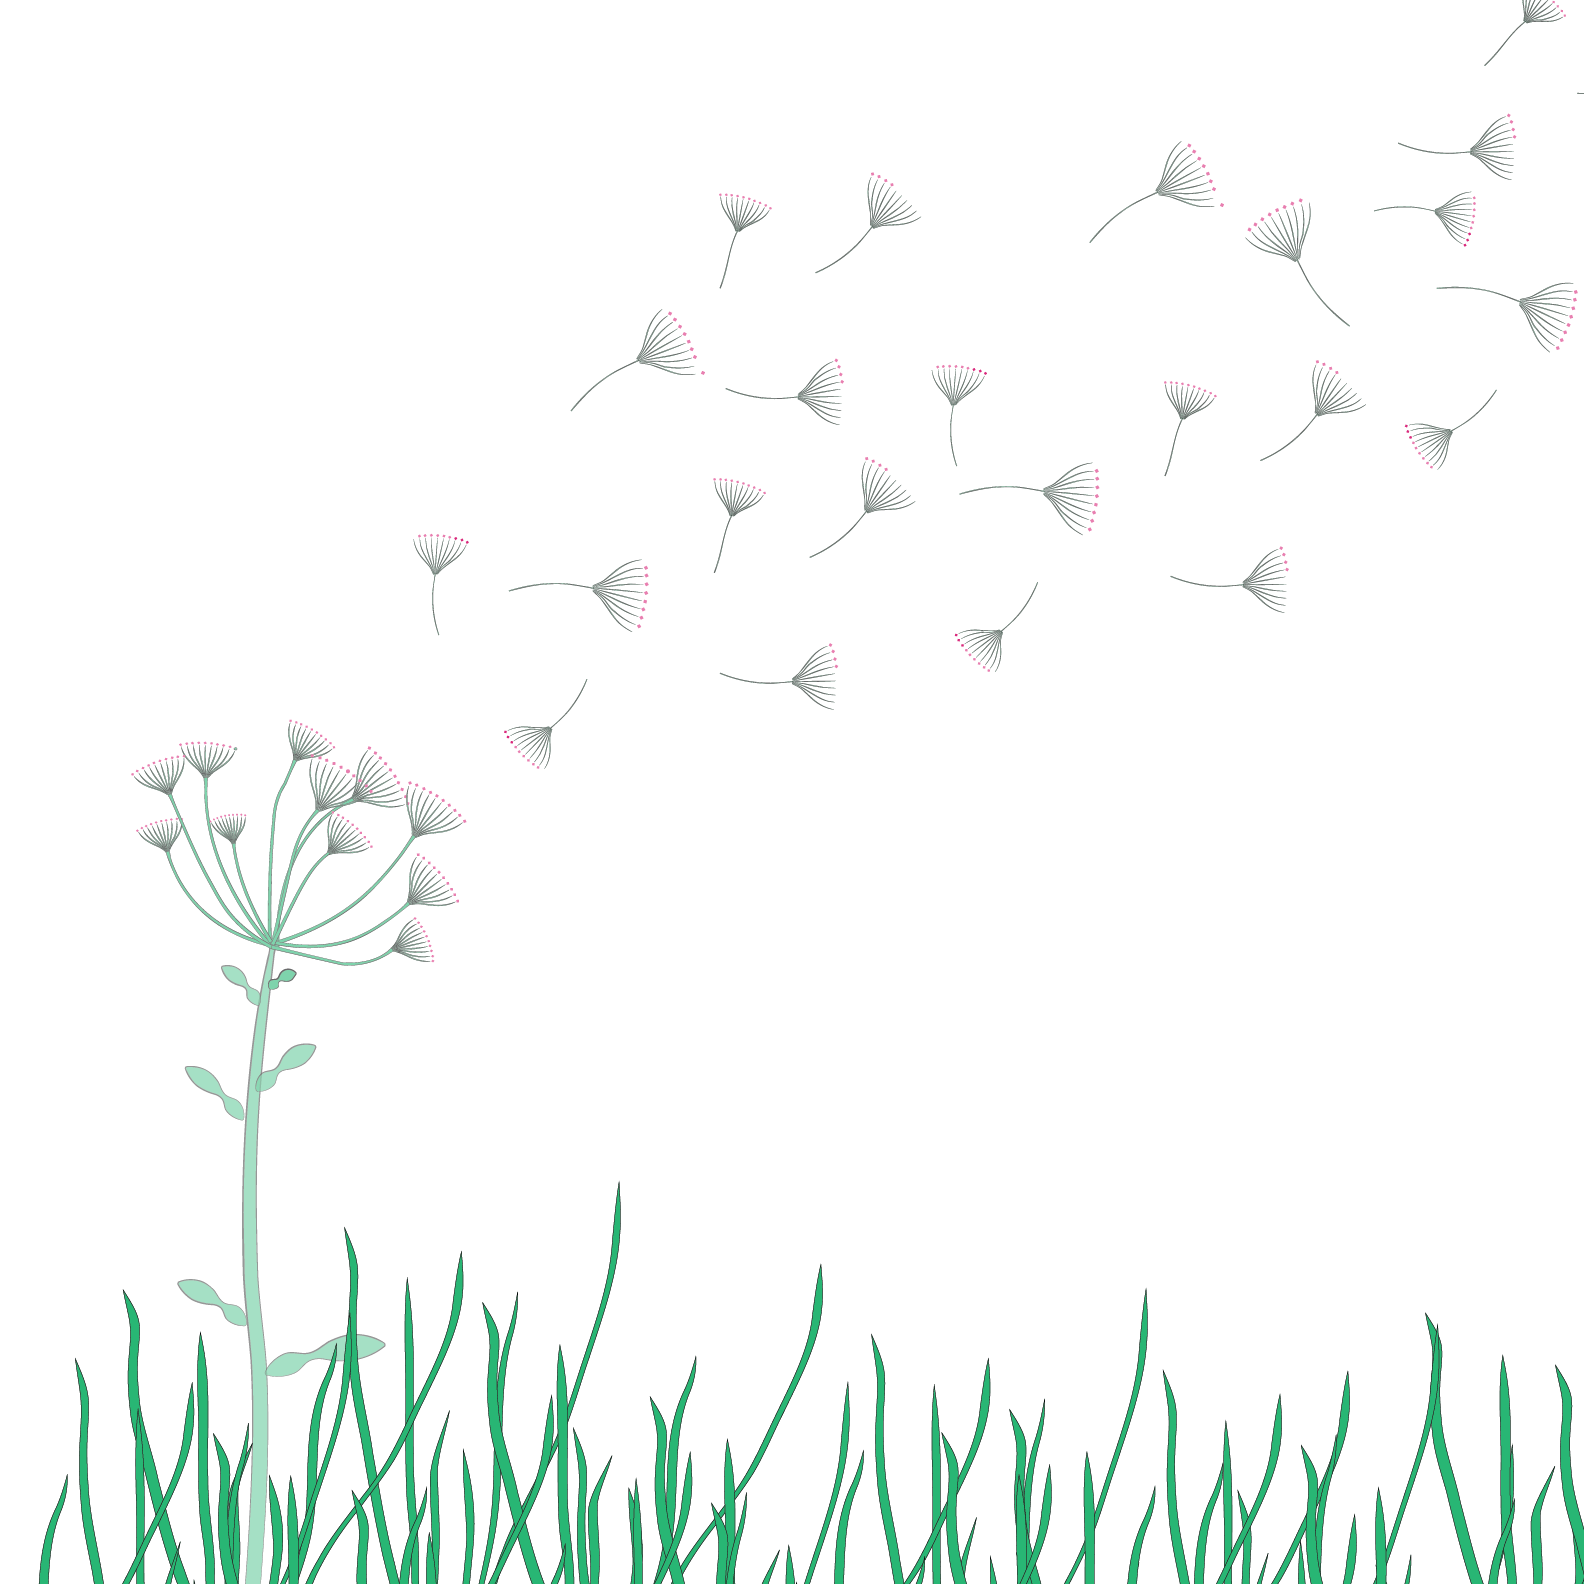 An illustration of dandelion seeds blowing in the wind from left to right. Bottom of image is wild green grass.